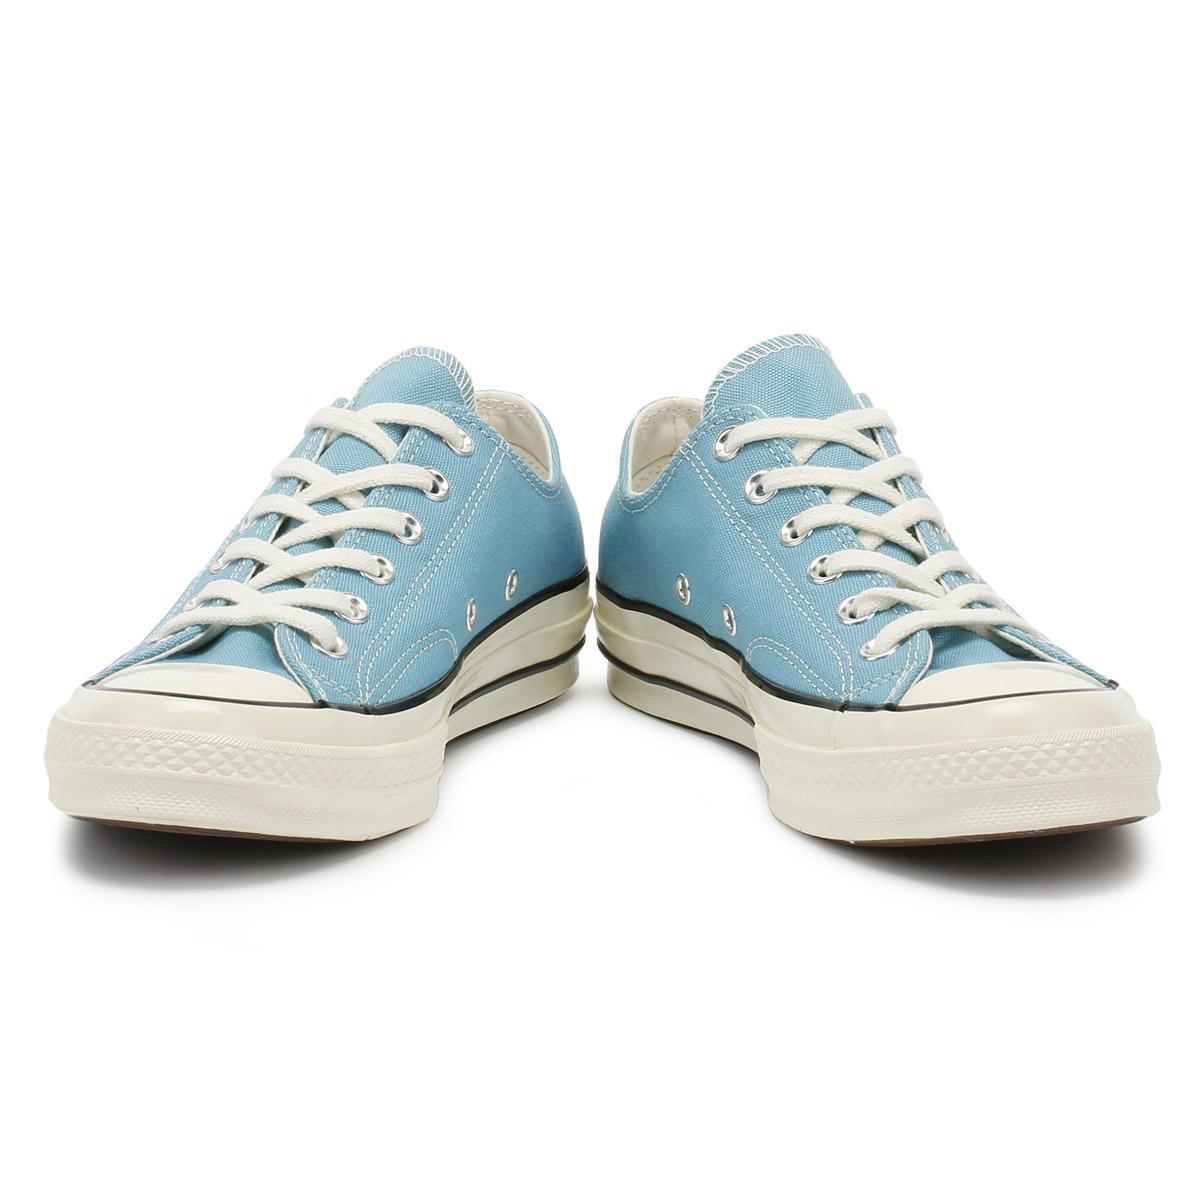 Converse Rubber Shoreline Blue Chuck Taylor Low Top 70's Trainers for ...